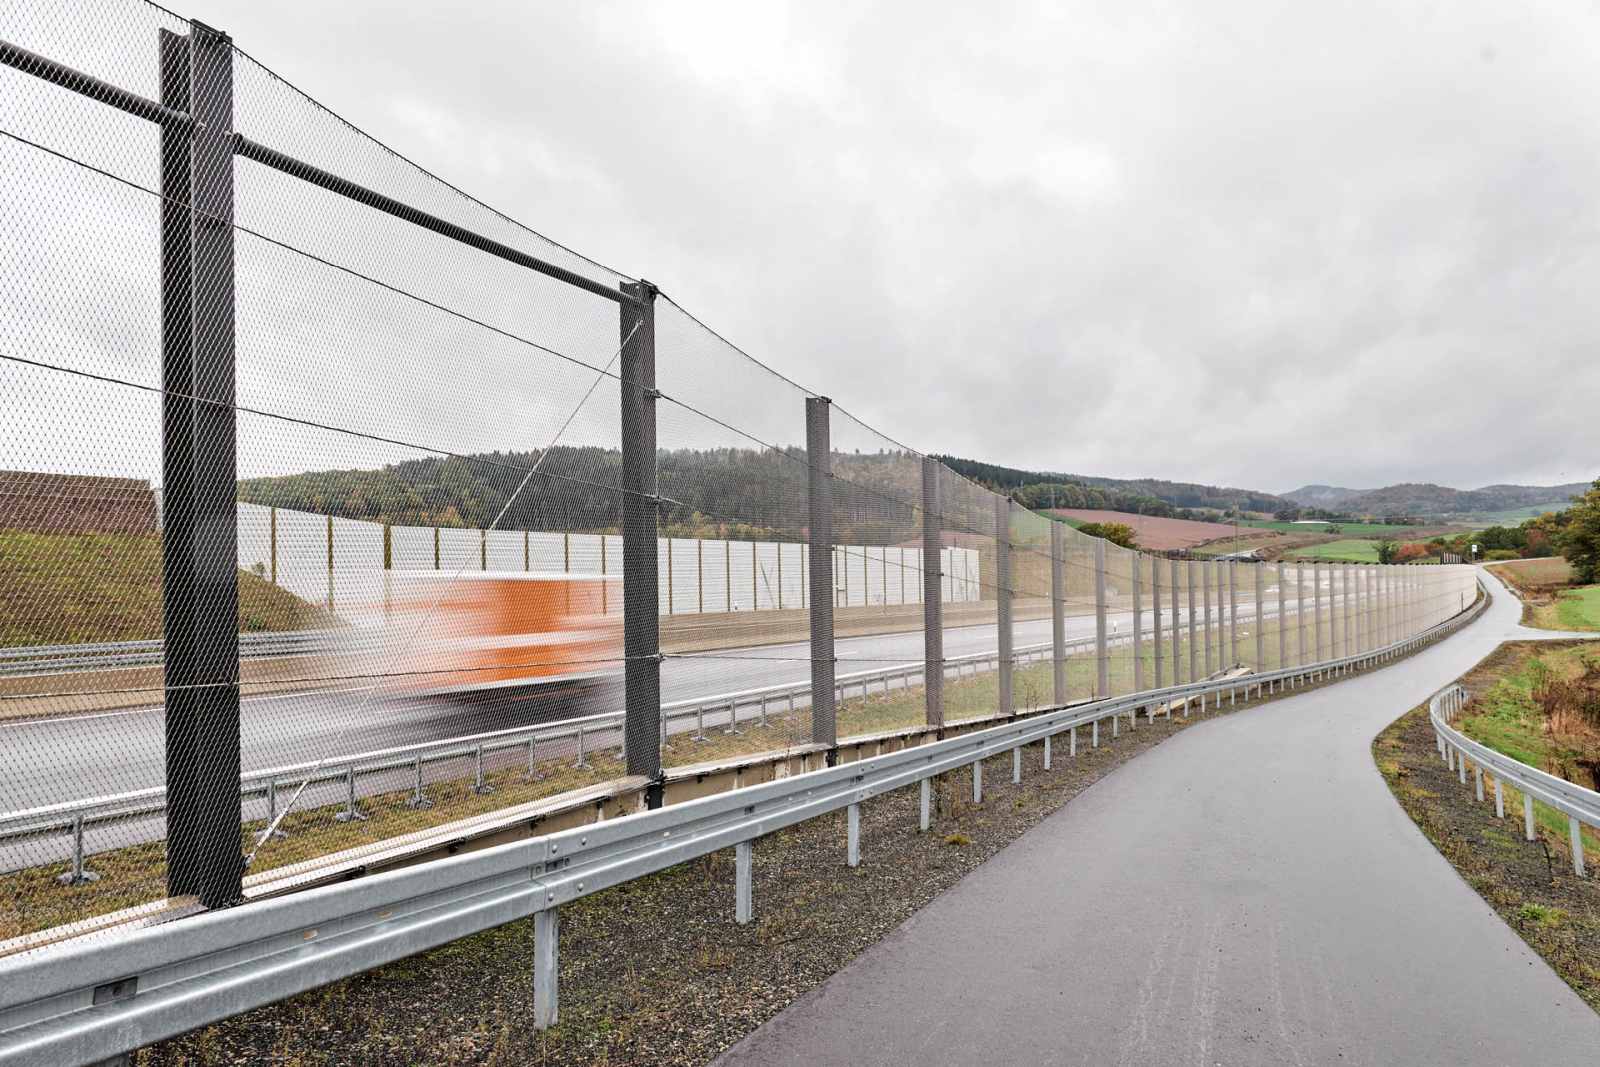 The safety fence runs along the A44 and crosses a habitat